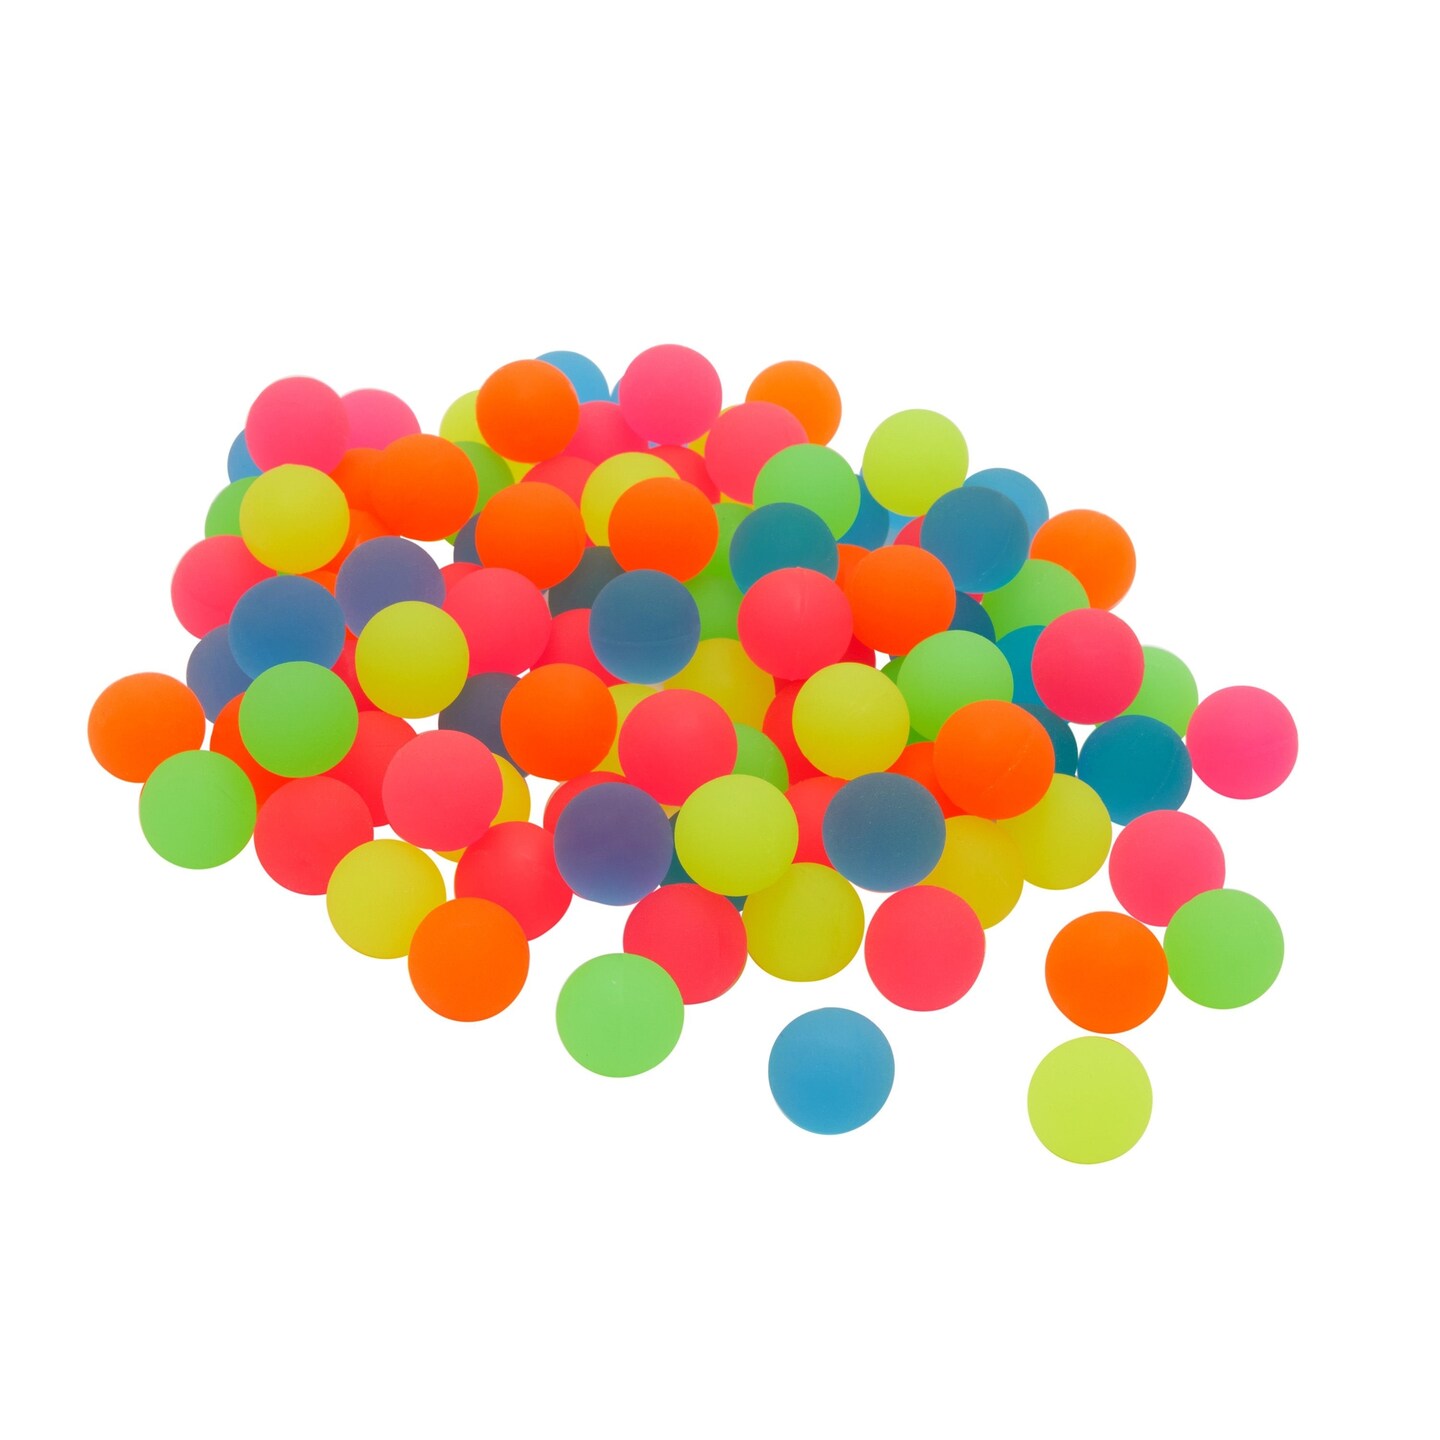 100 Pack Bouncy Balls for Kids Bulk - 1 inch/ 25mm Rubber Super Bounce Balls for Birthday Party Favors, Prizes, Gifts (Neon)